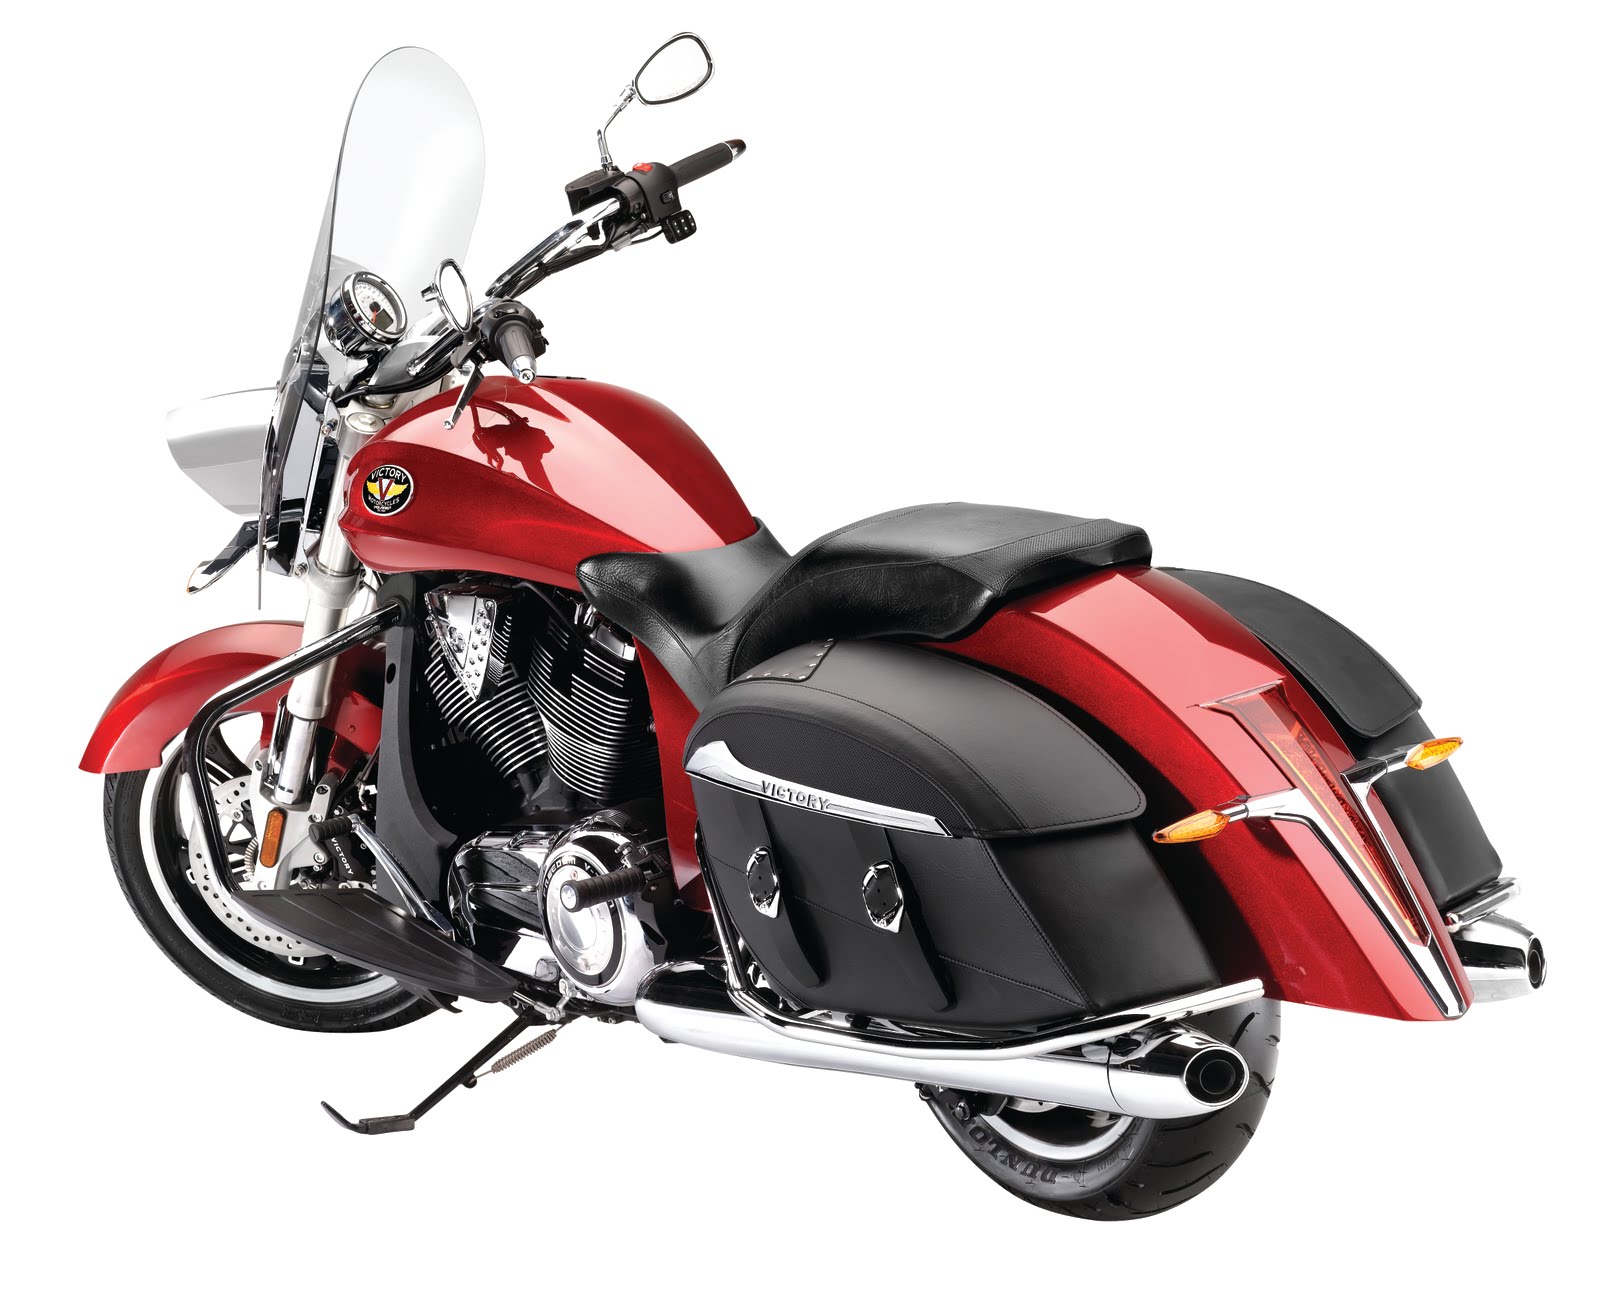 2011 Motorcycles Victory Releases 2012 Models